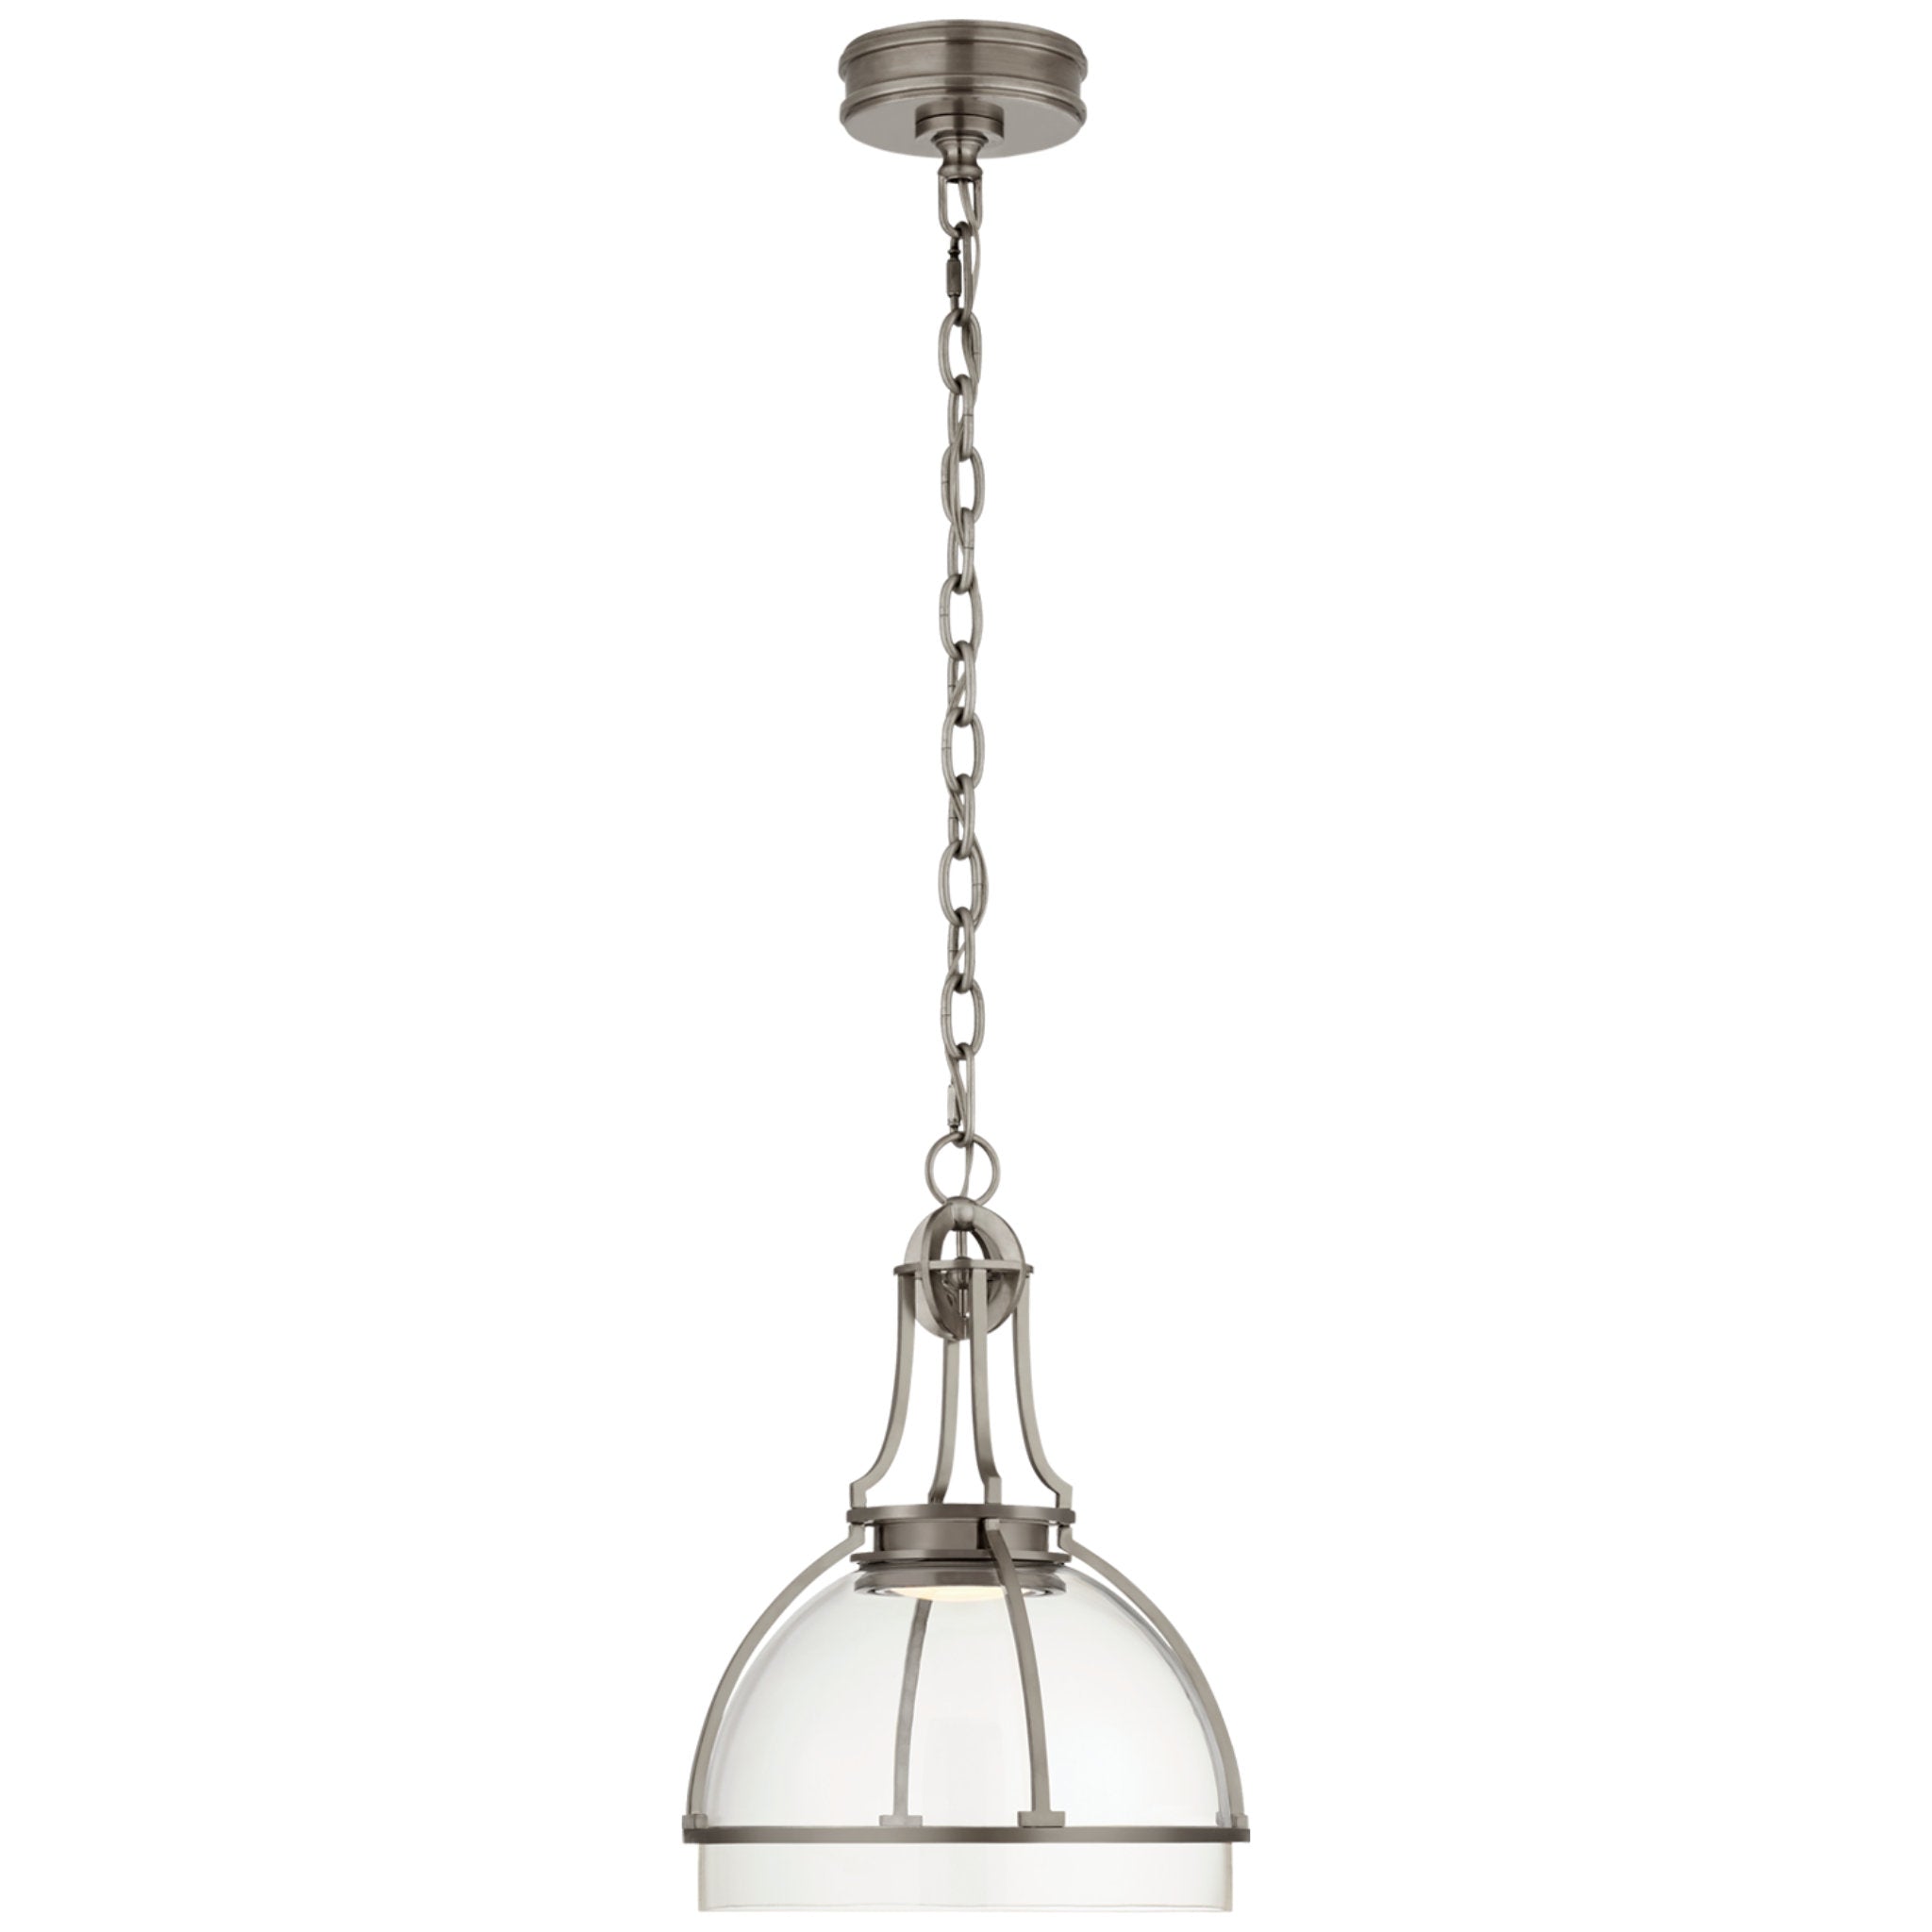 Chapman & Myers Gracie Medium Dome Pendant in Antique Nickel with Clear Glass